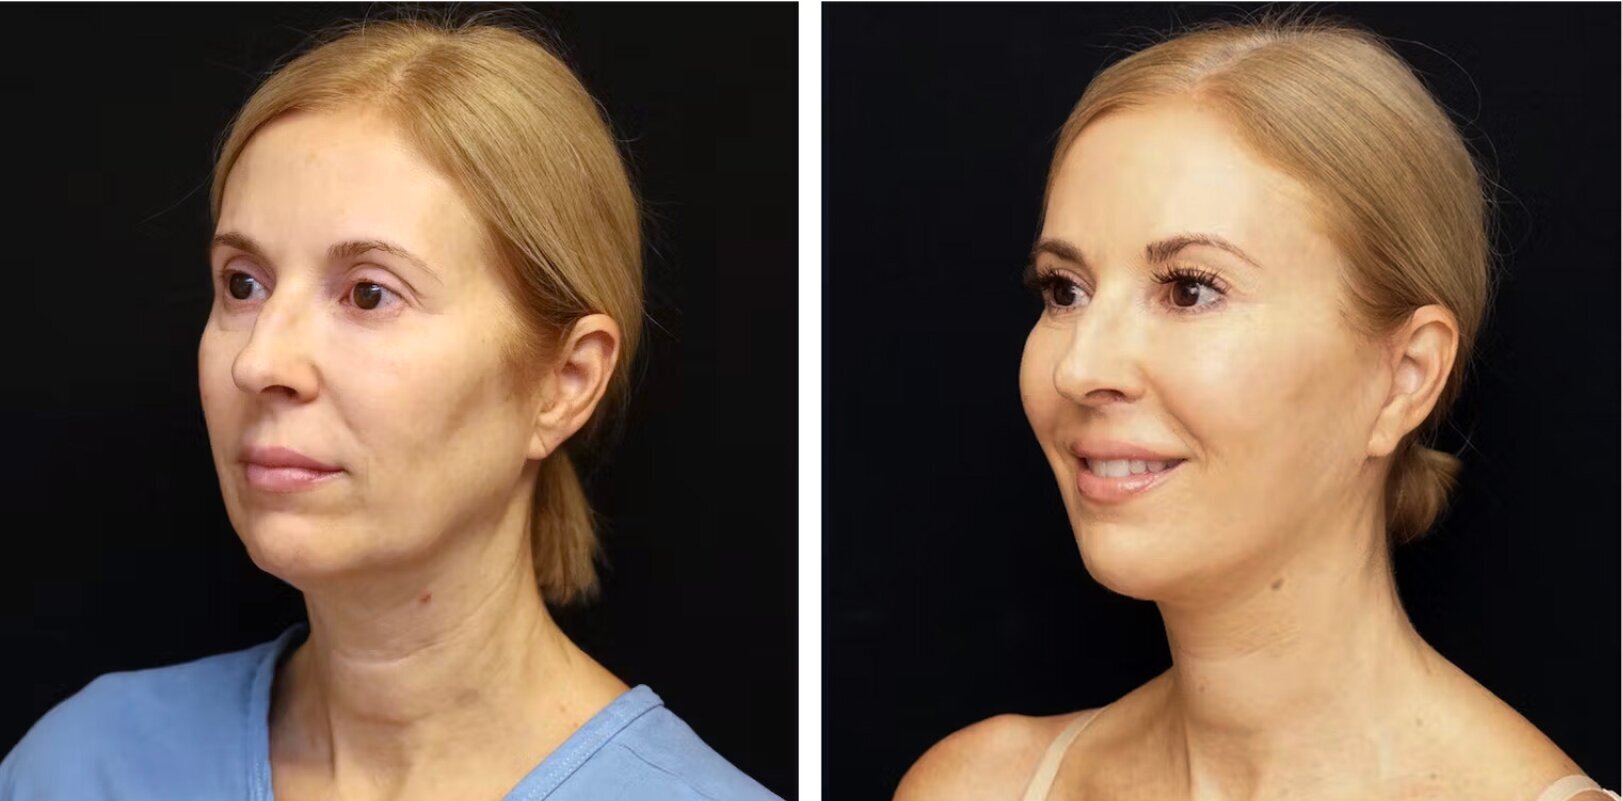 Kristen's facelift facial rejuvenation Before and After Photos